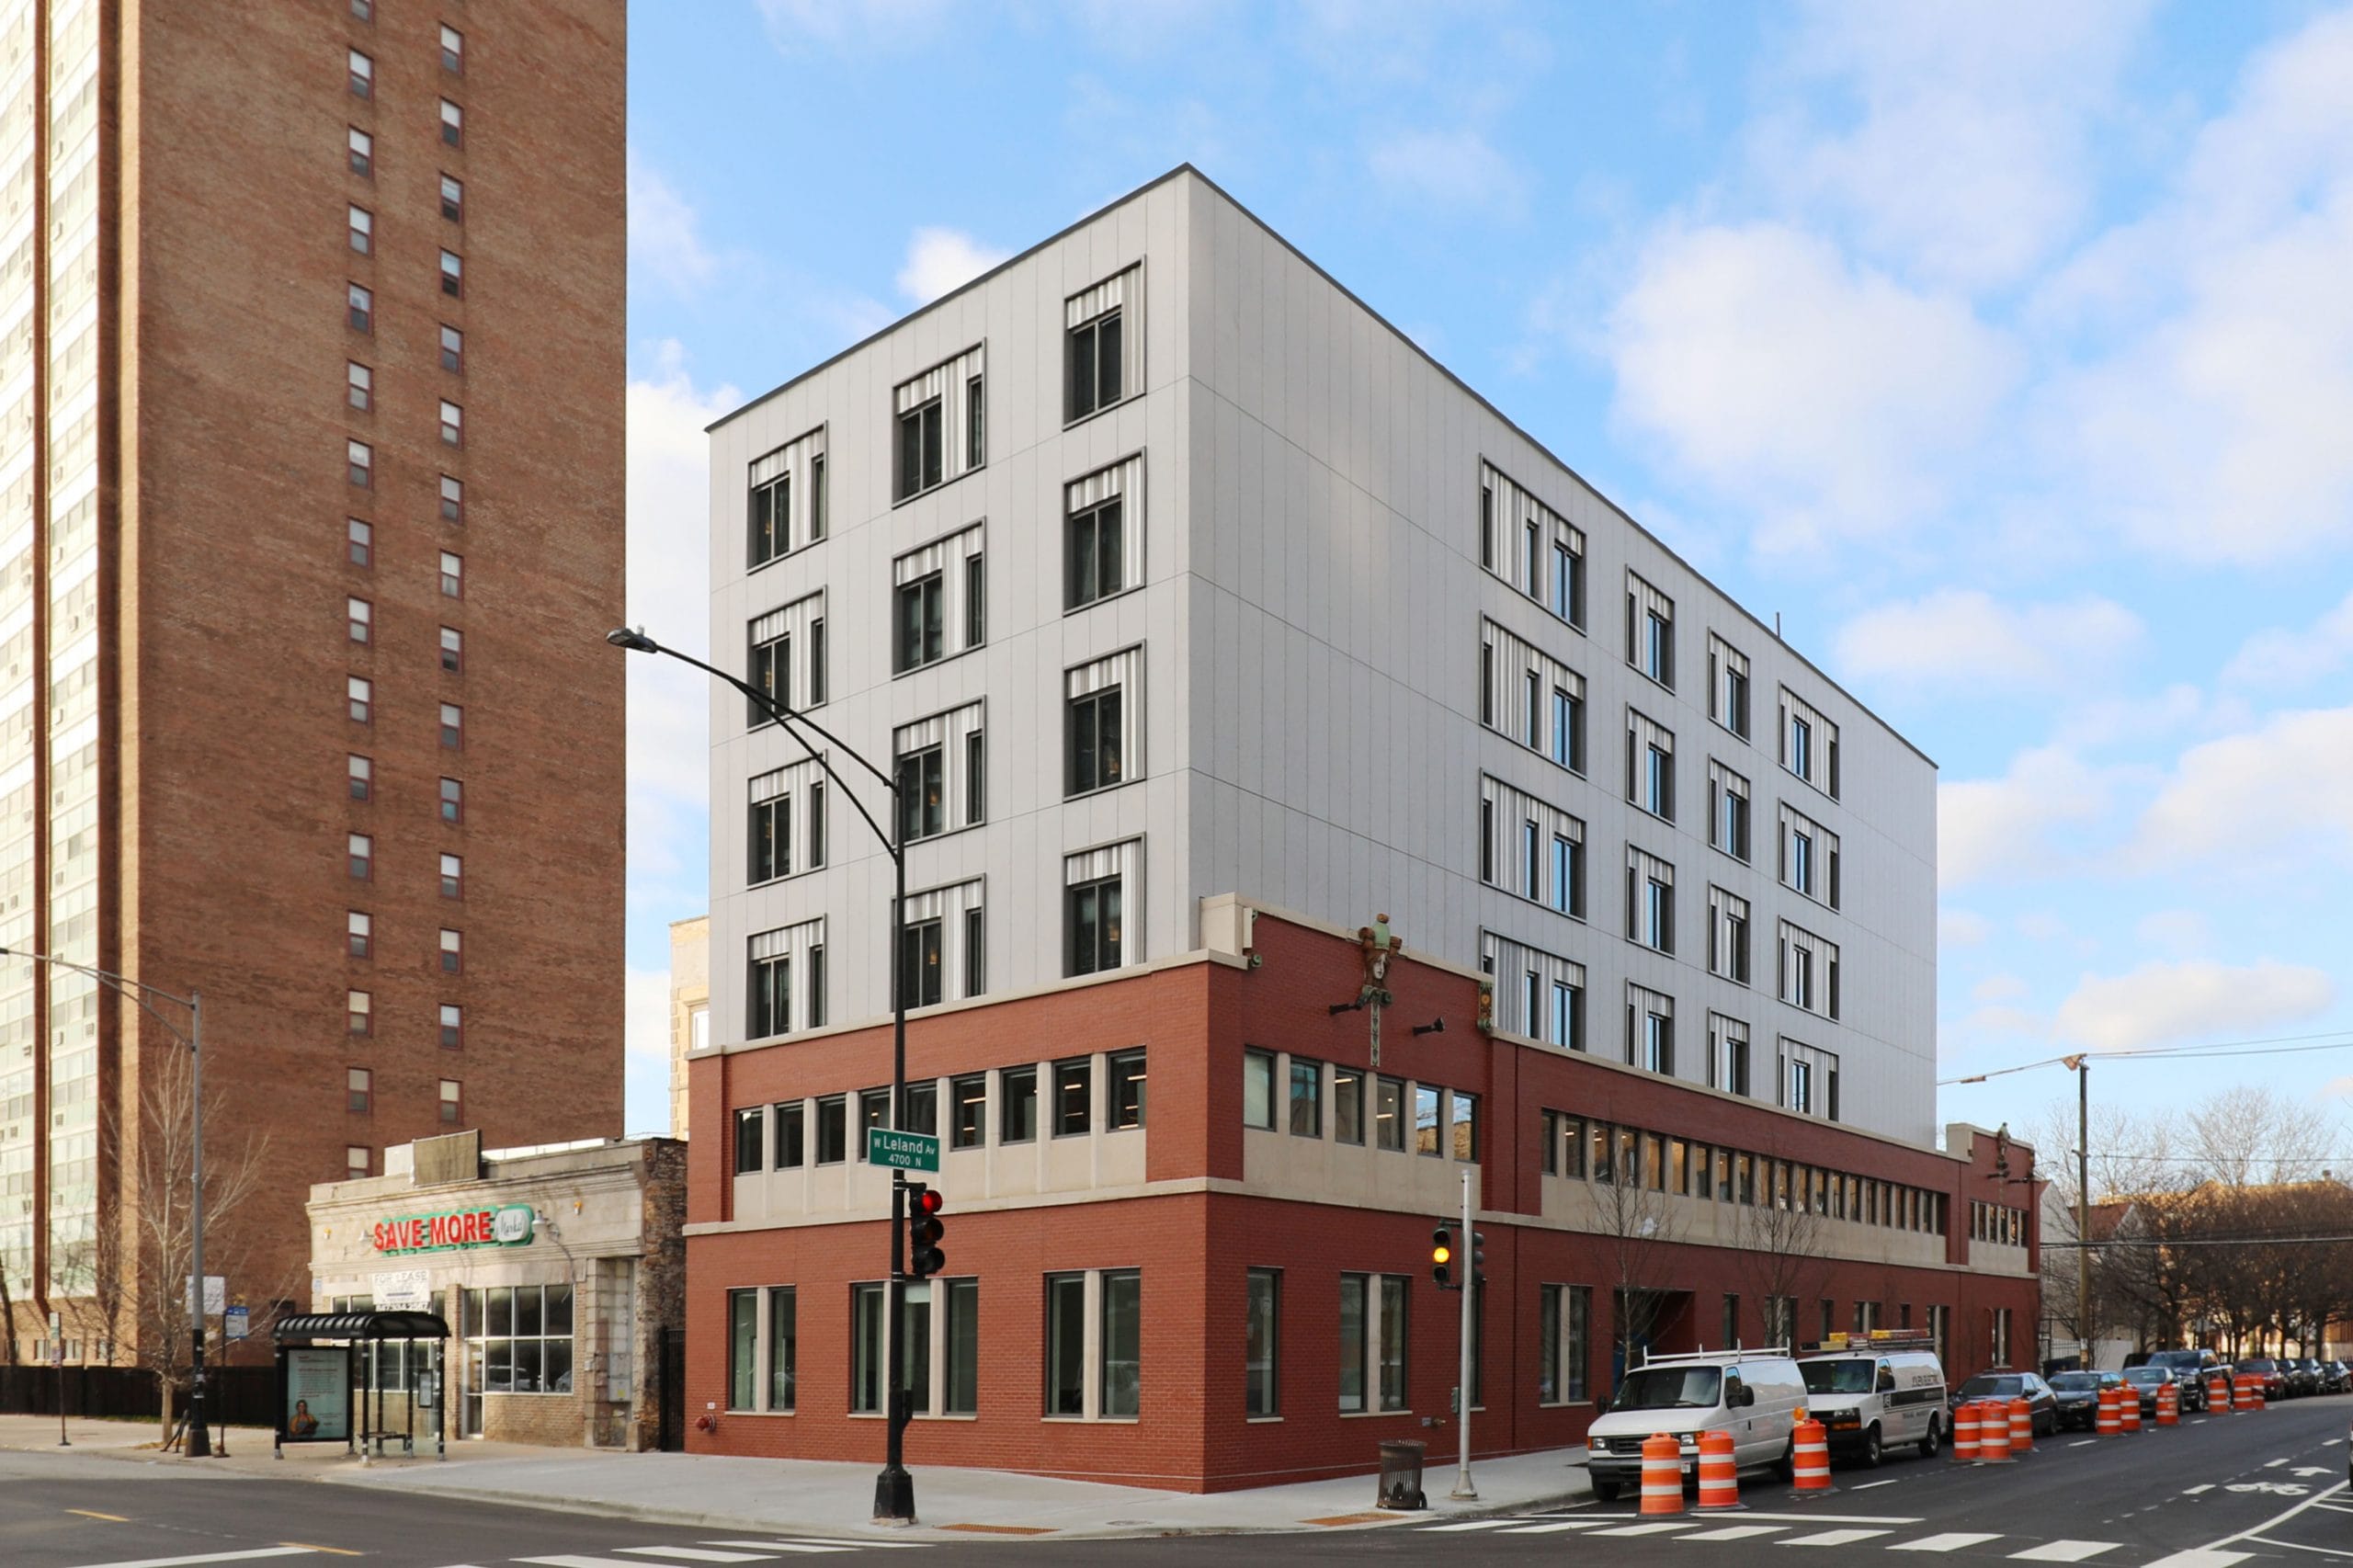 Construction wraps up on Sarah’s Circle’s six-story supportive housing facility for women on Chicago’s North Side